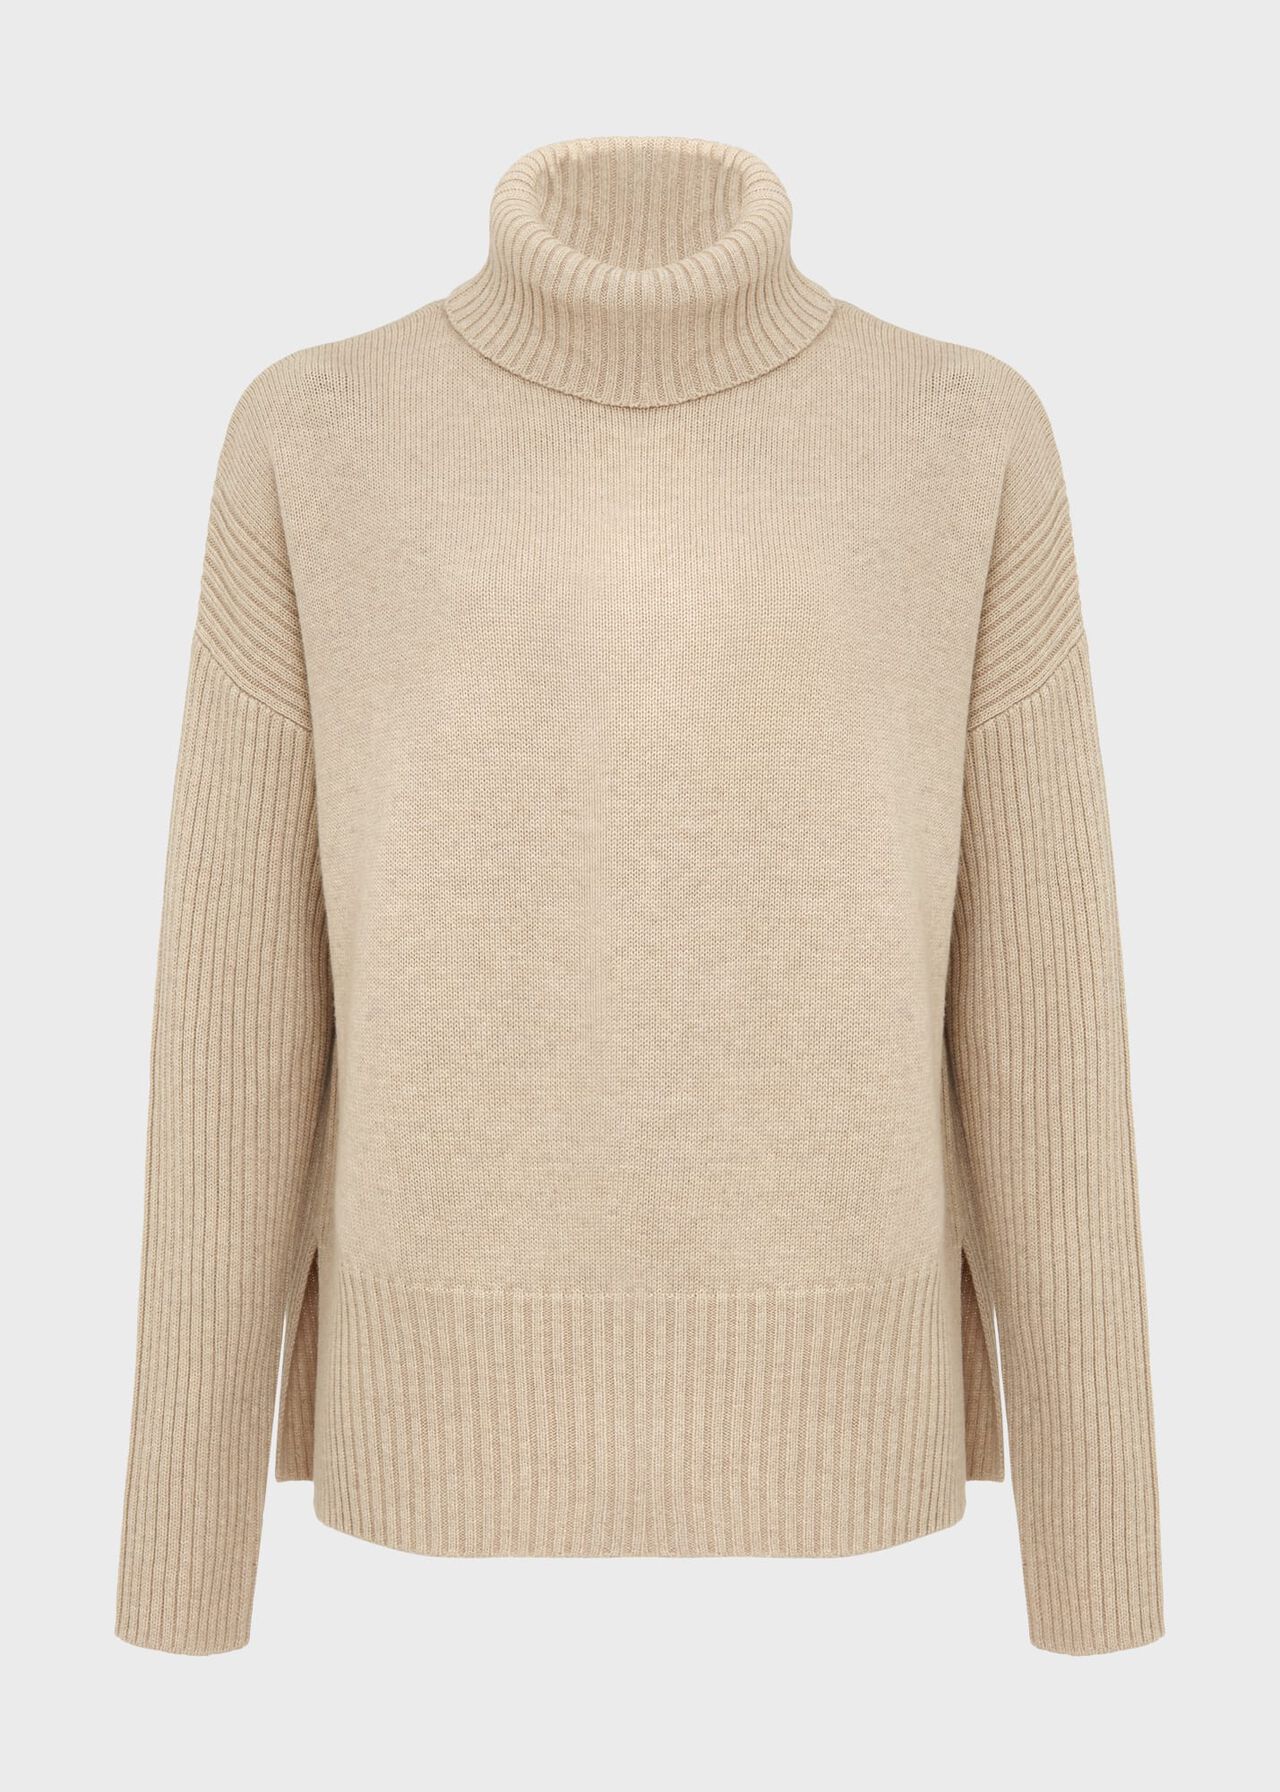 Lovell Co-Ord Wool Cotton Roll Neck Jumper, Oatmeal Marl, hi-res